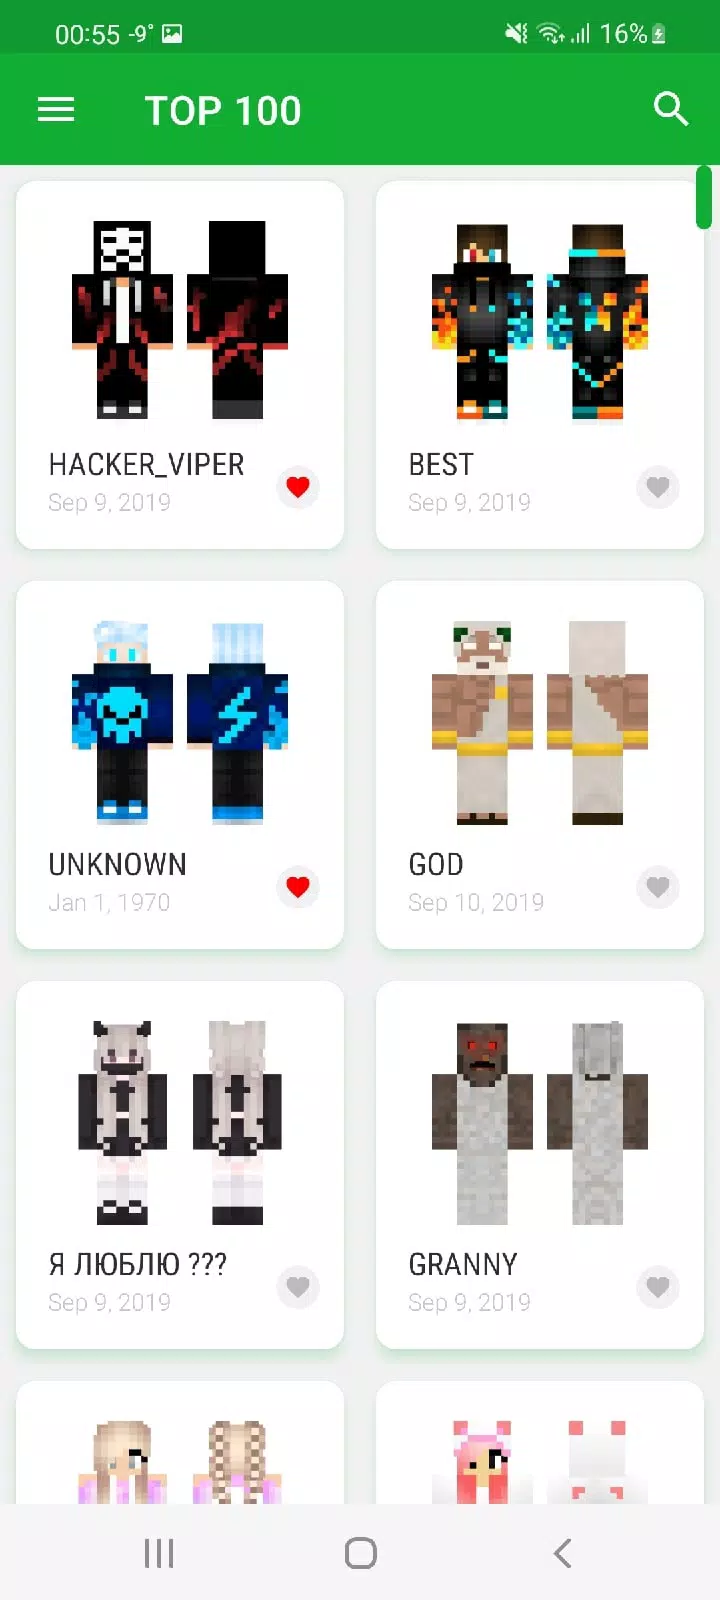 Free Skincraft A Minecraft Skin Editor APK Download For Android